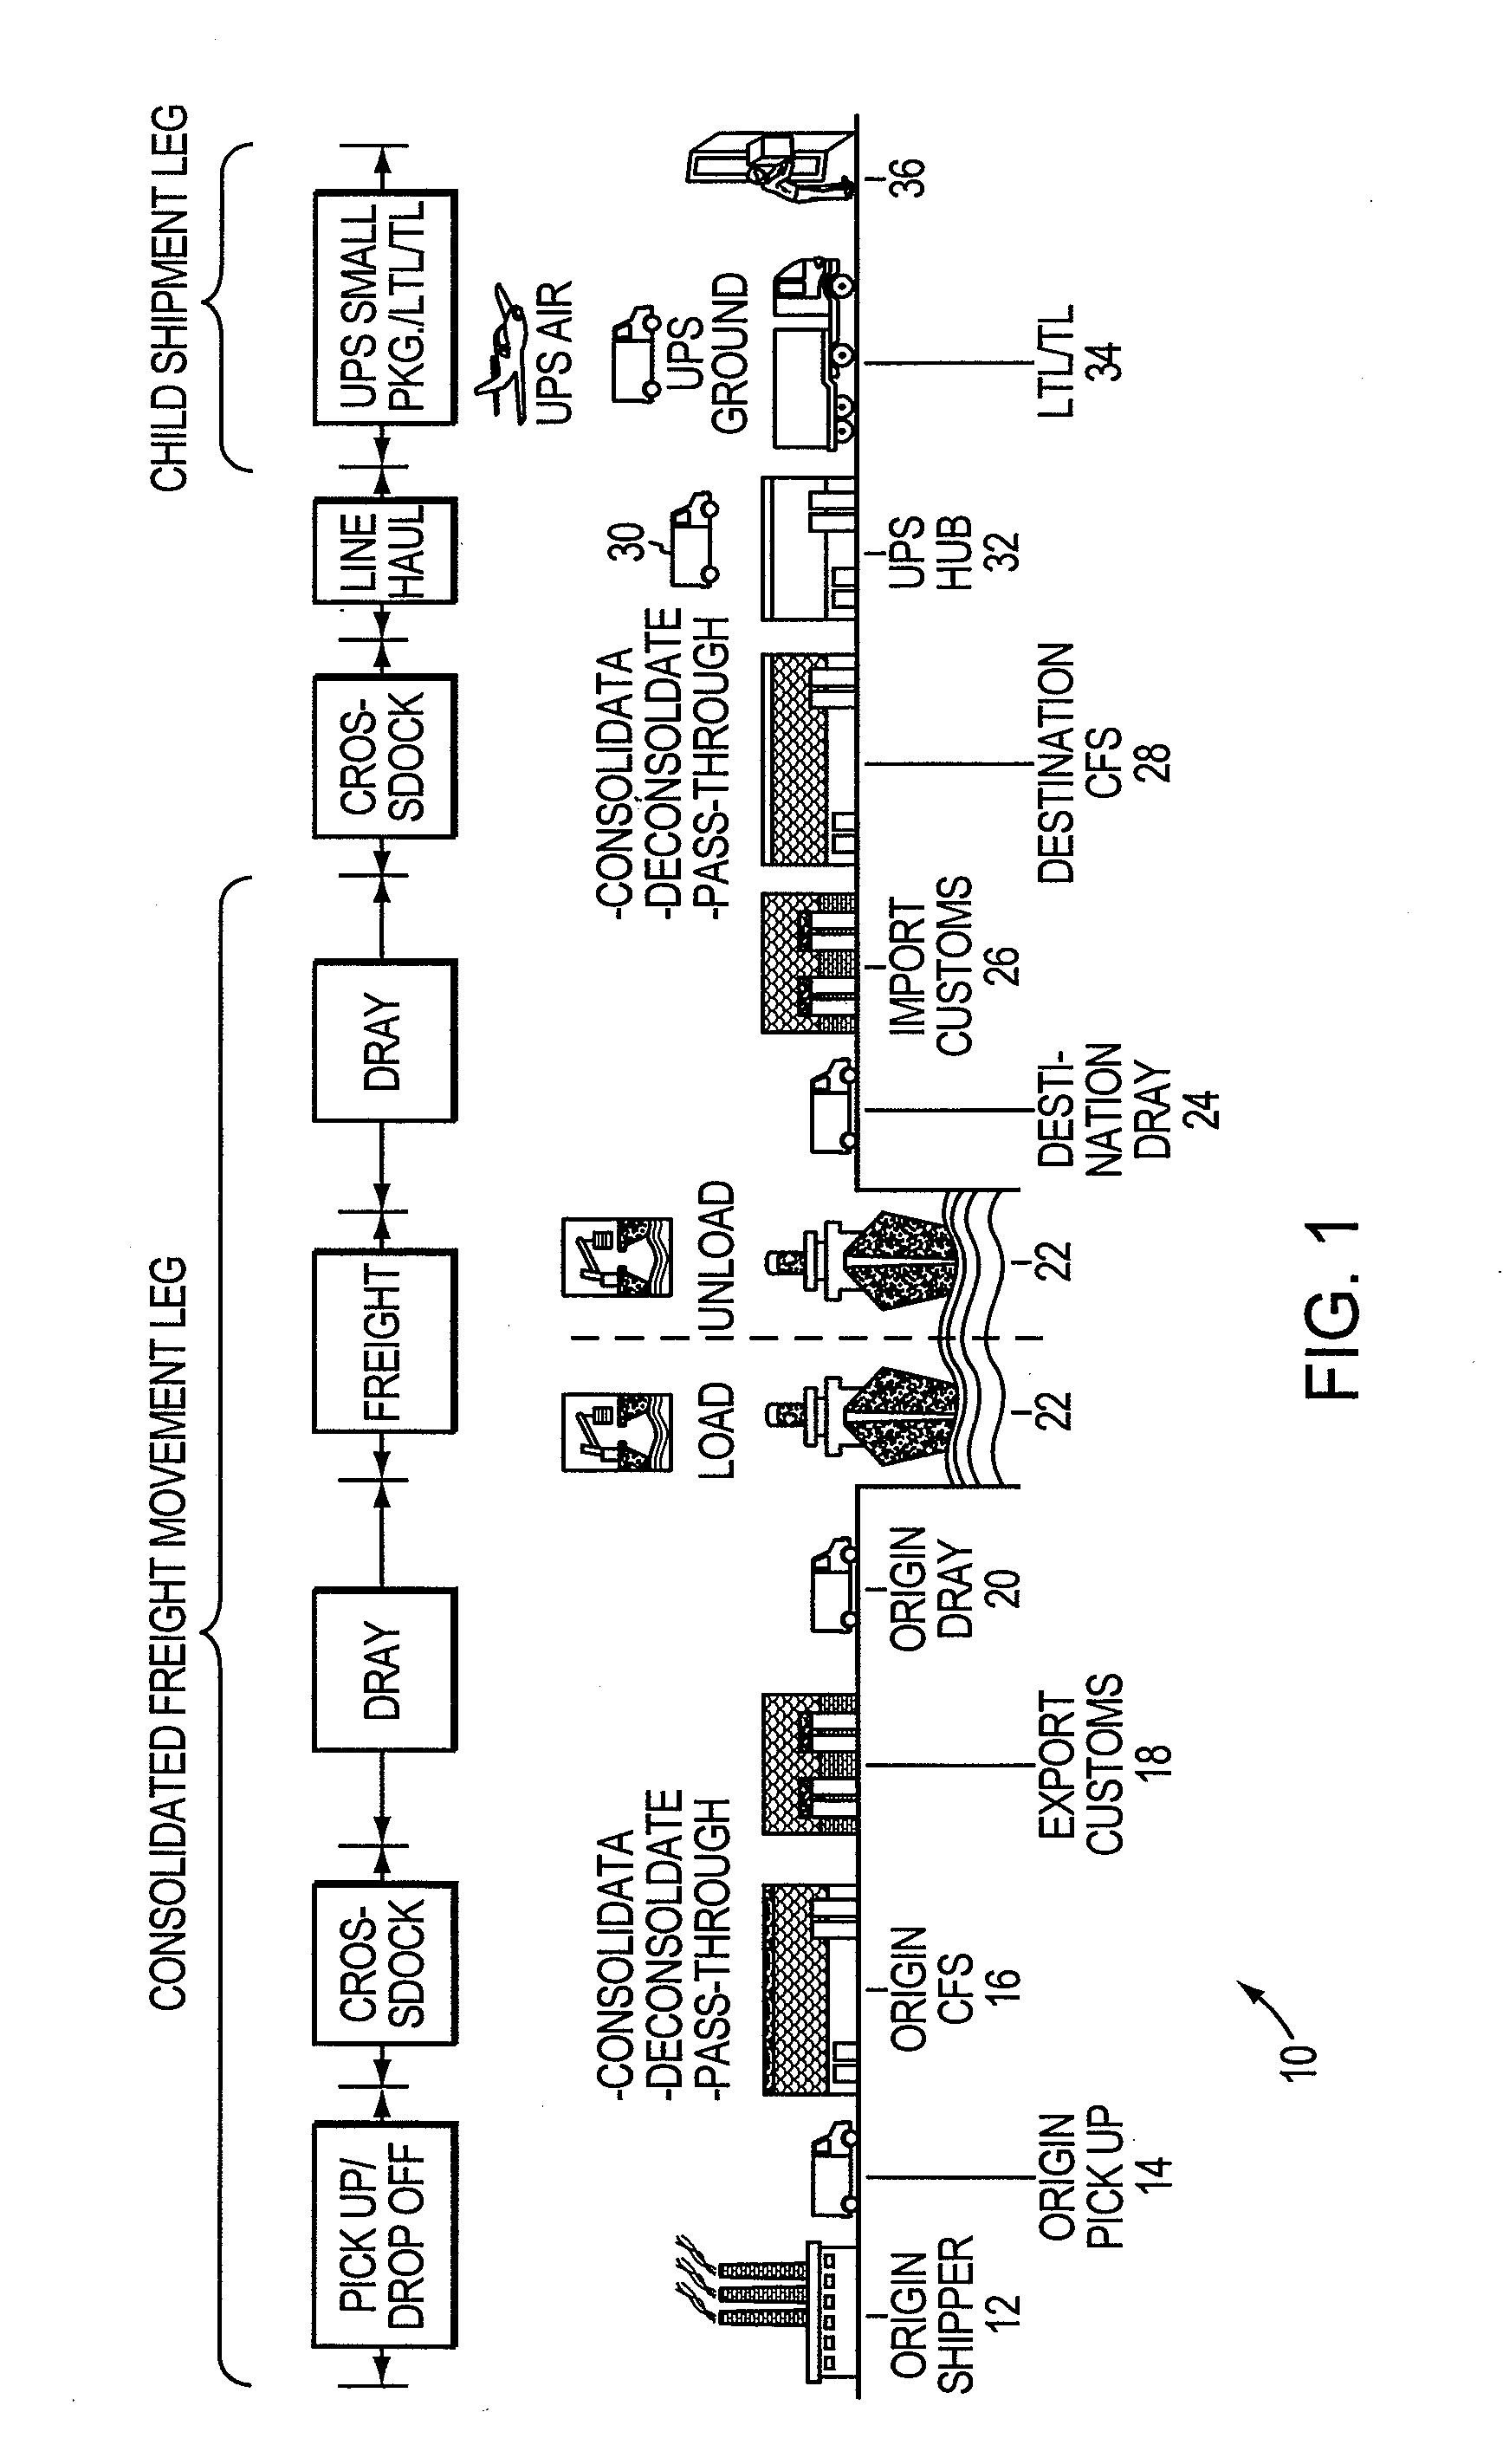 Systems and methods for integrated global shipping and visibility